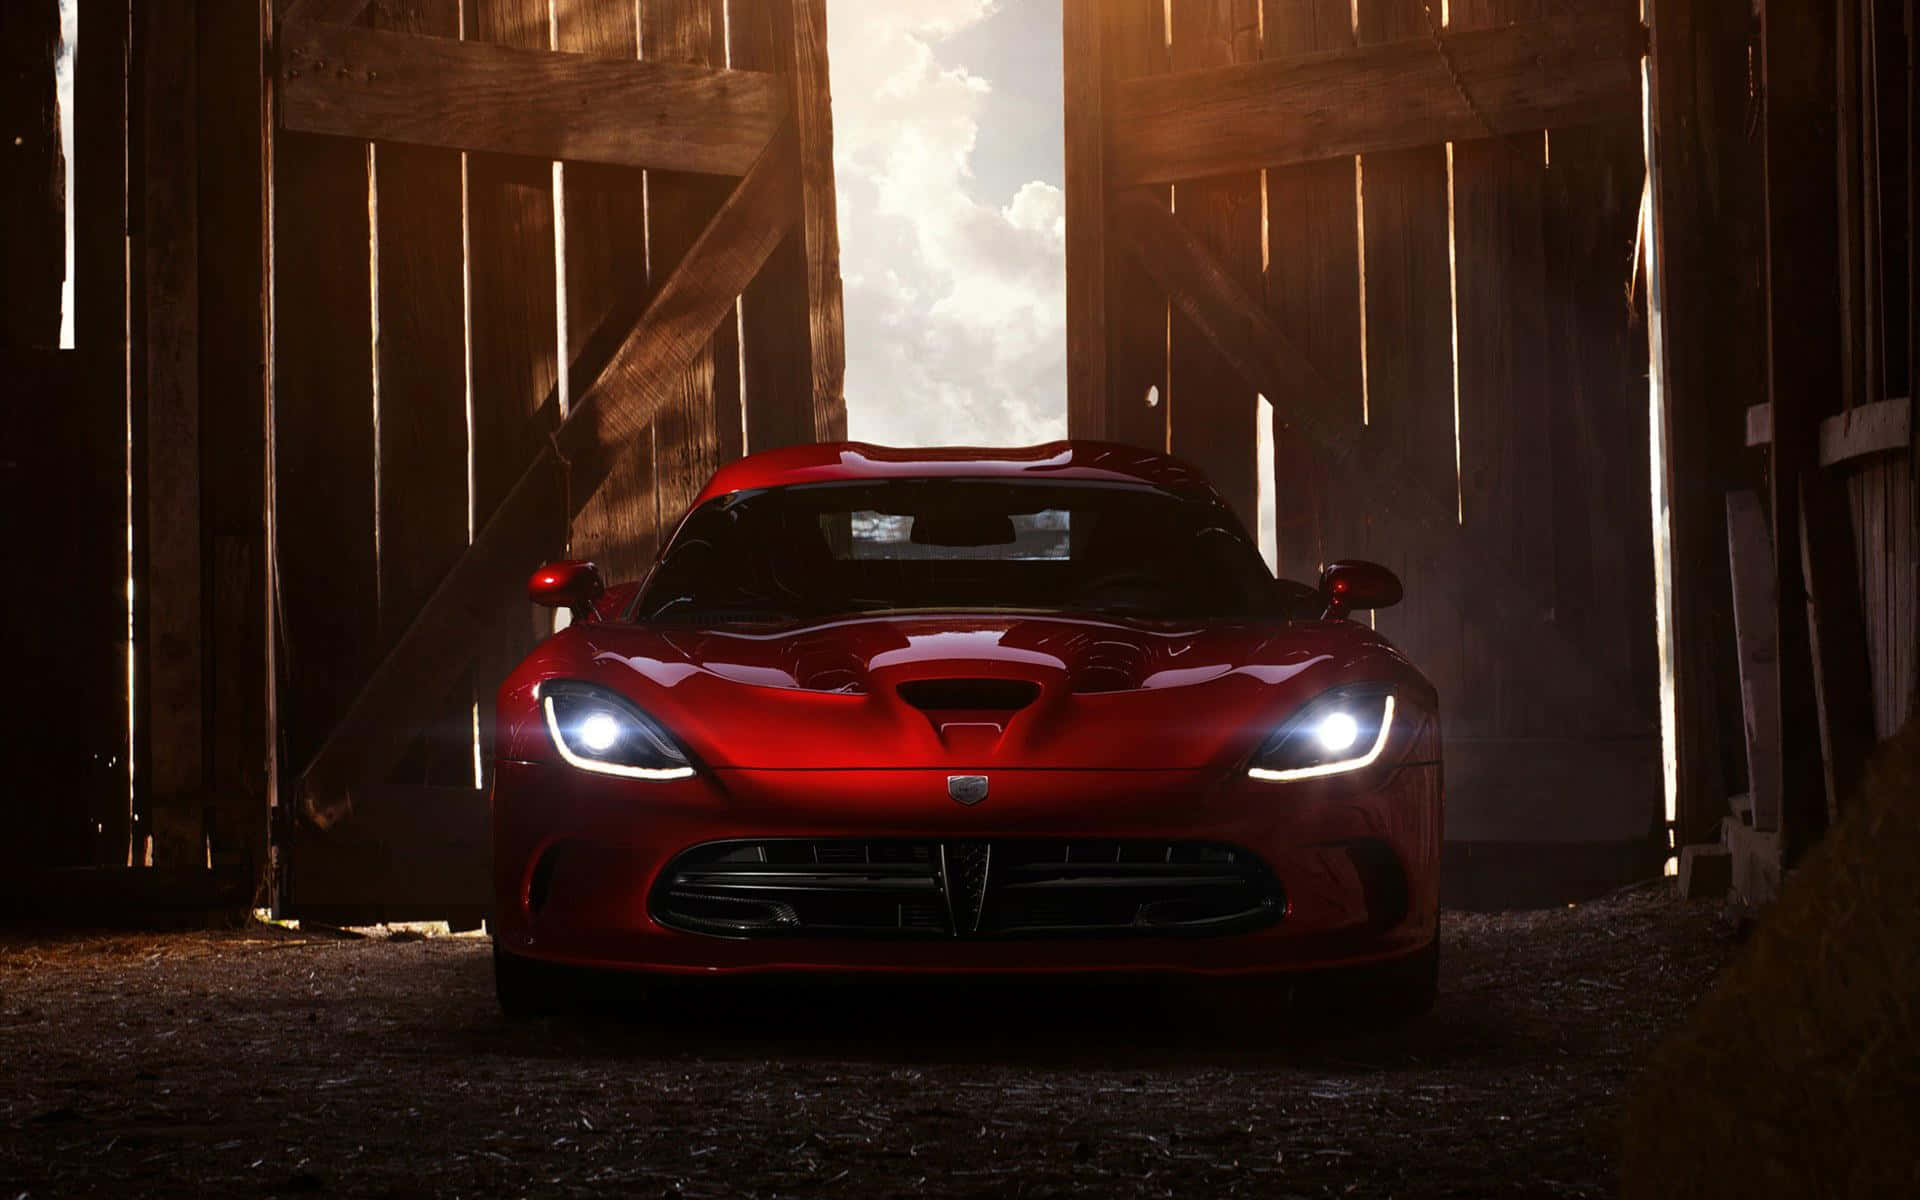 "Witness the Power of a Viper" Wallpaper